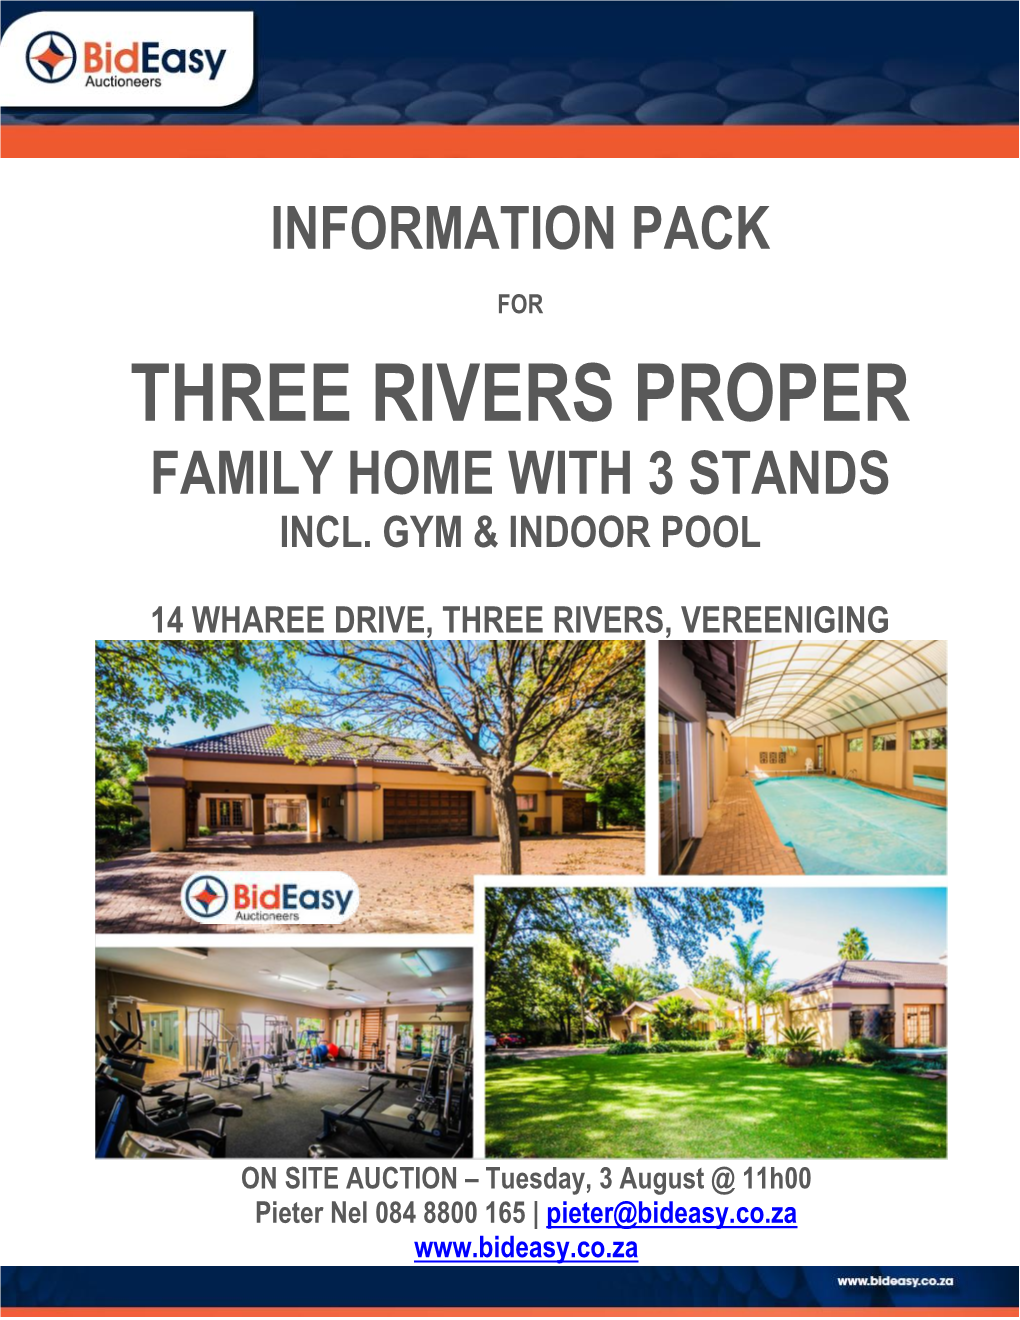 Three Rivers Proper Family Home with 3 Stands Incl